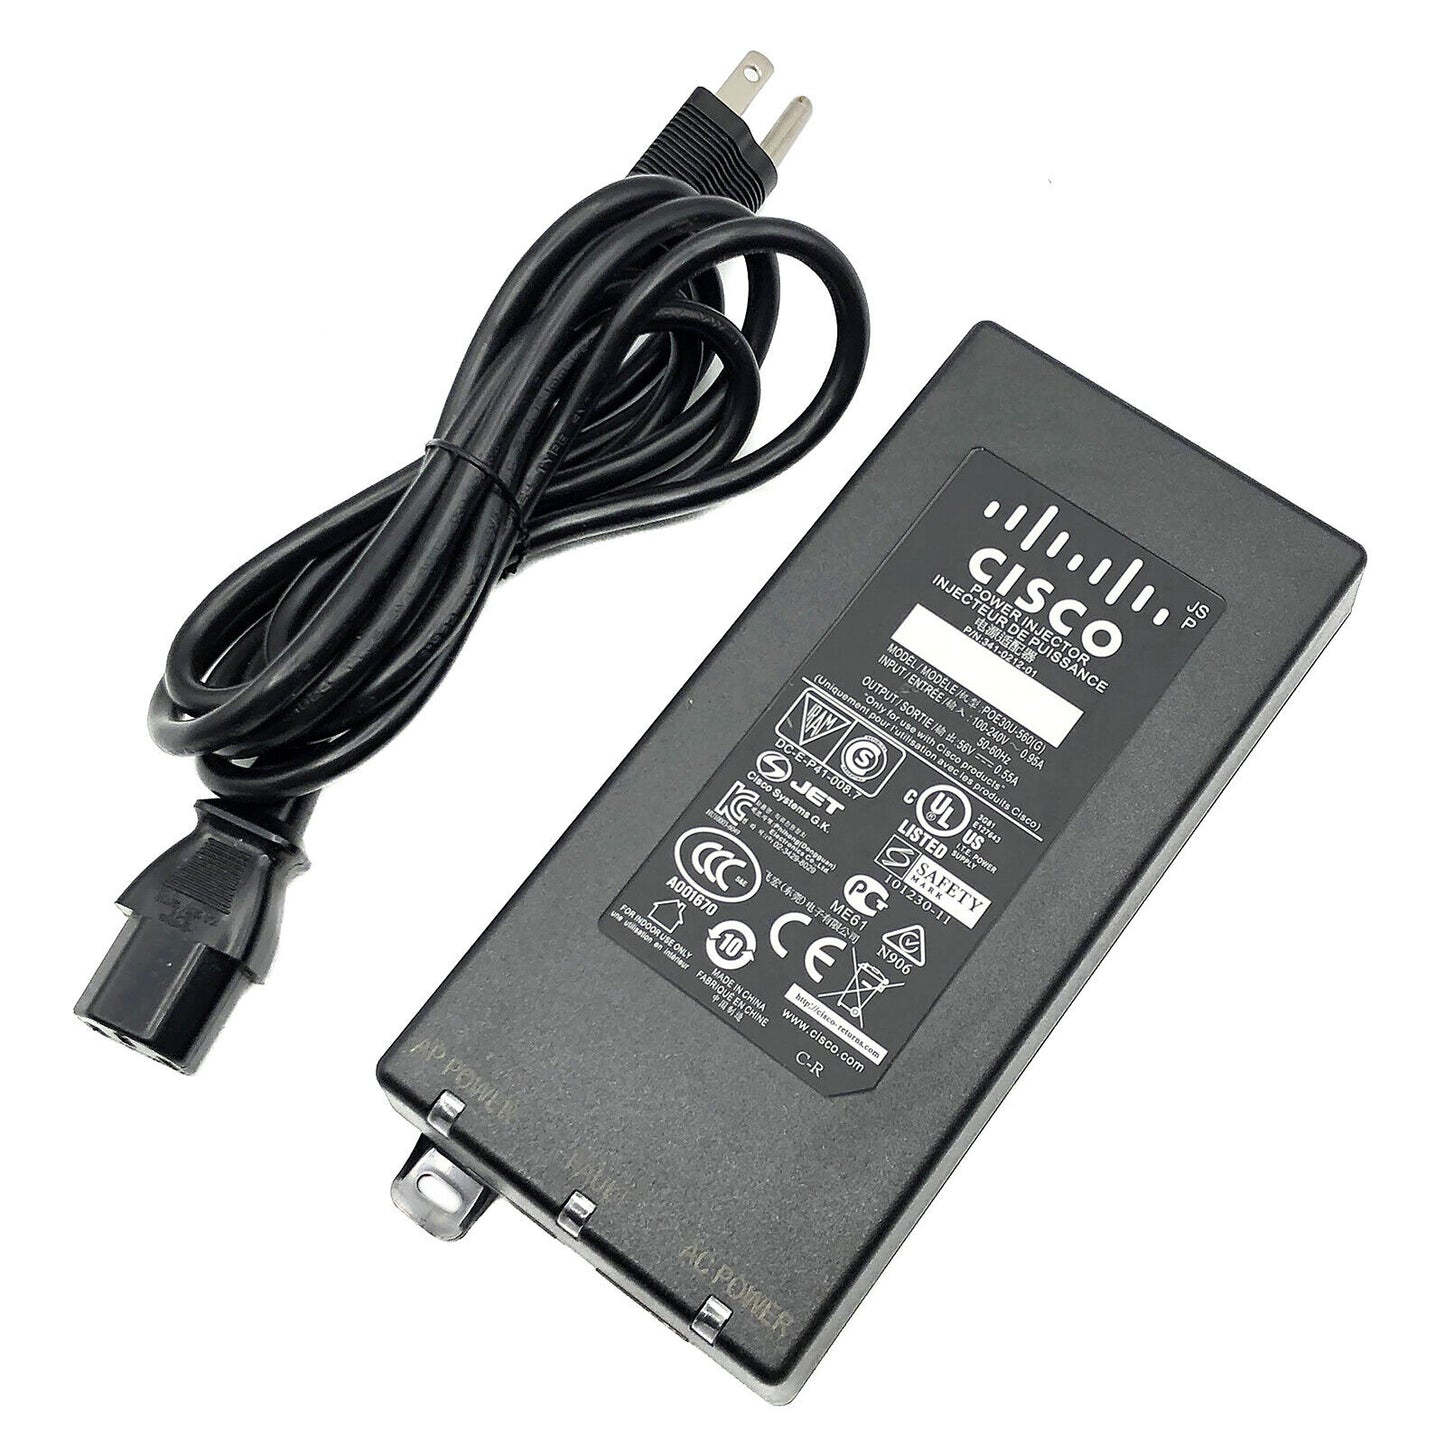 Genuine Cisco Power Injector For Aironet AIR-PWRINJ4 Wireless Access Point w/PC